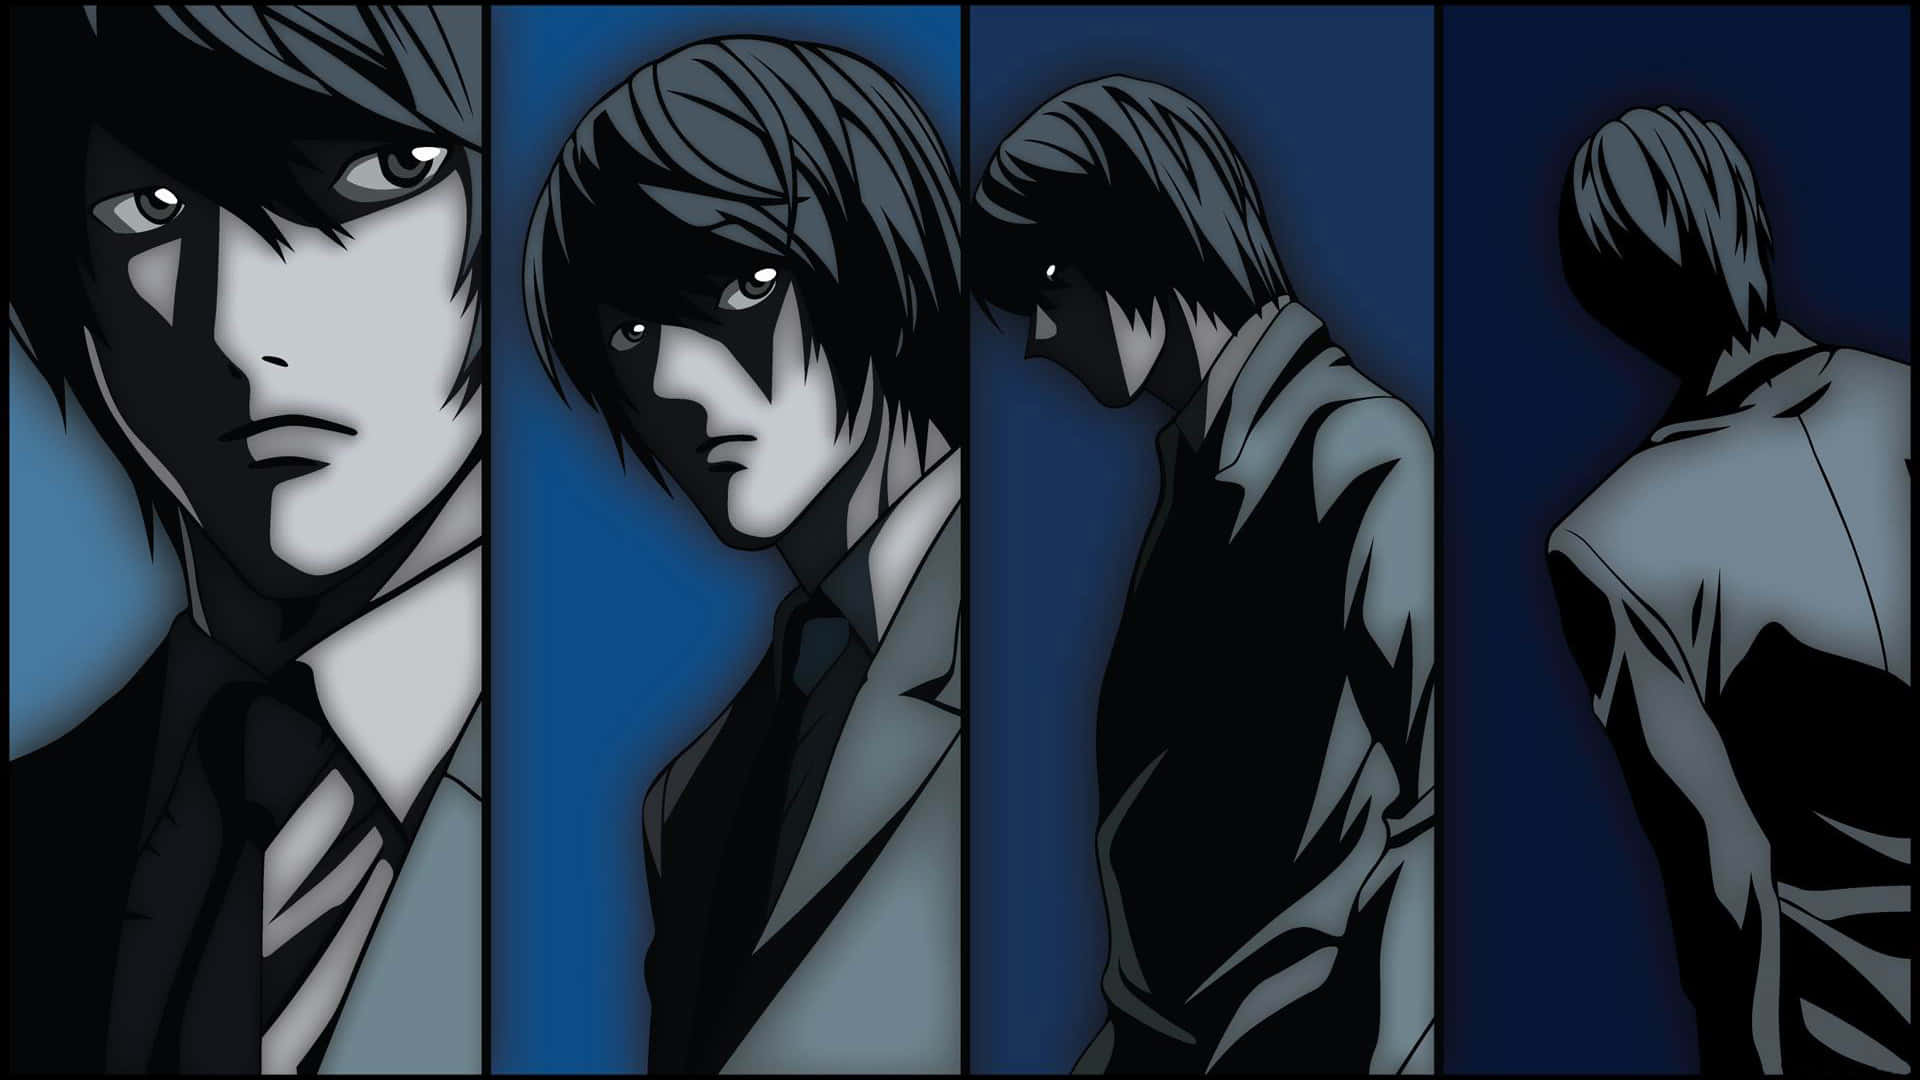 Light Yagami, the protagonist of the anime DEATH NOTE